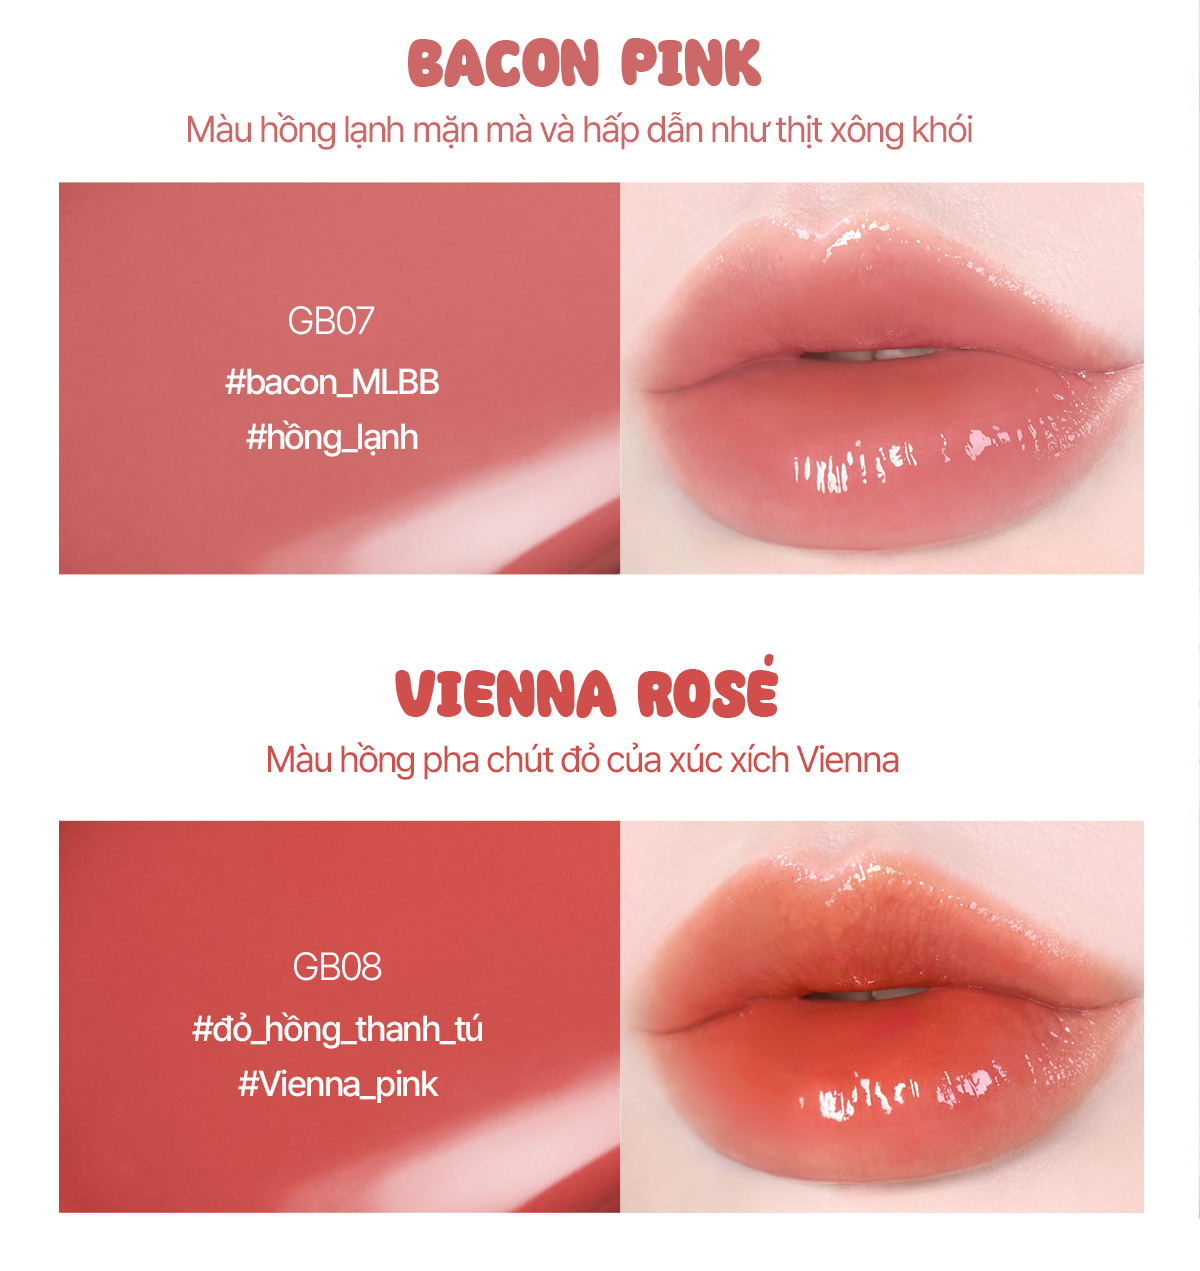 GB07 - Bacon Pink